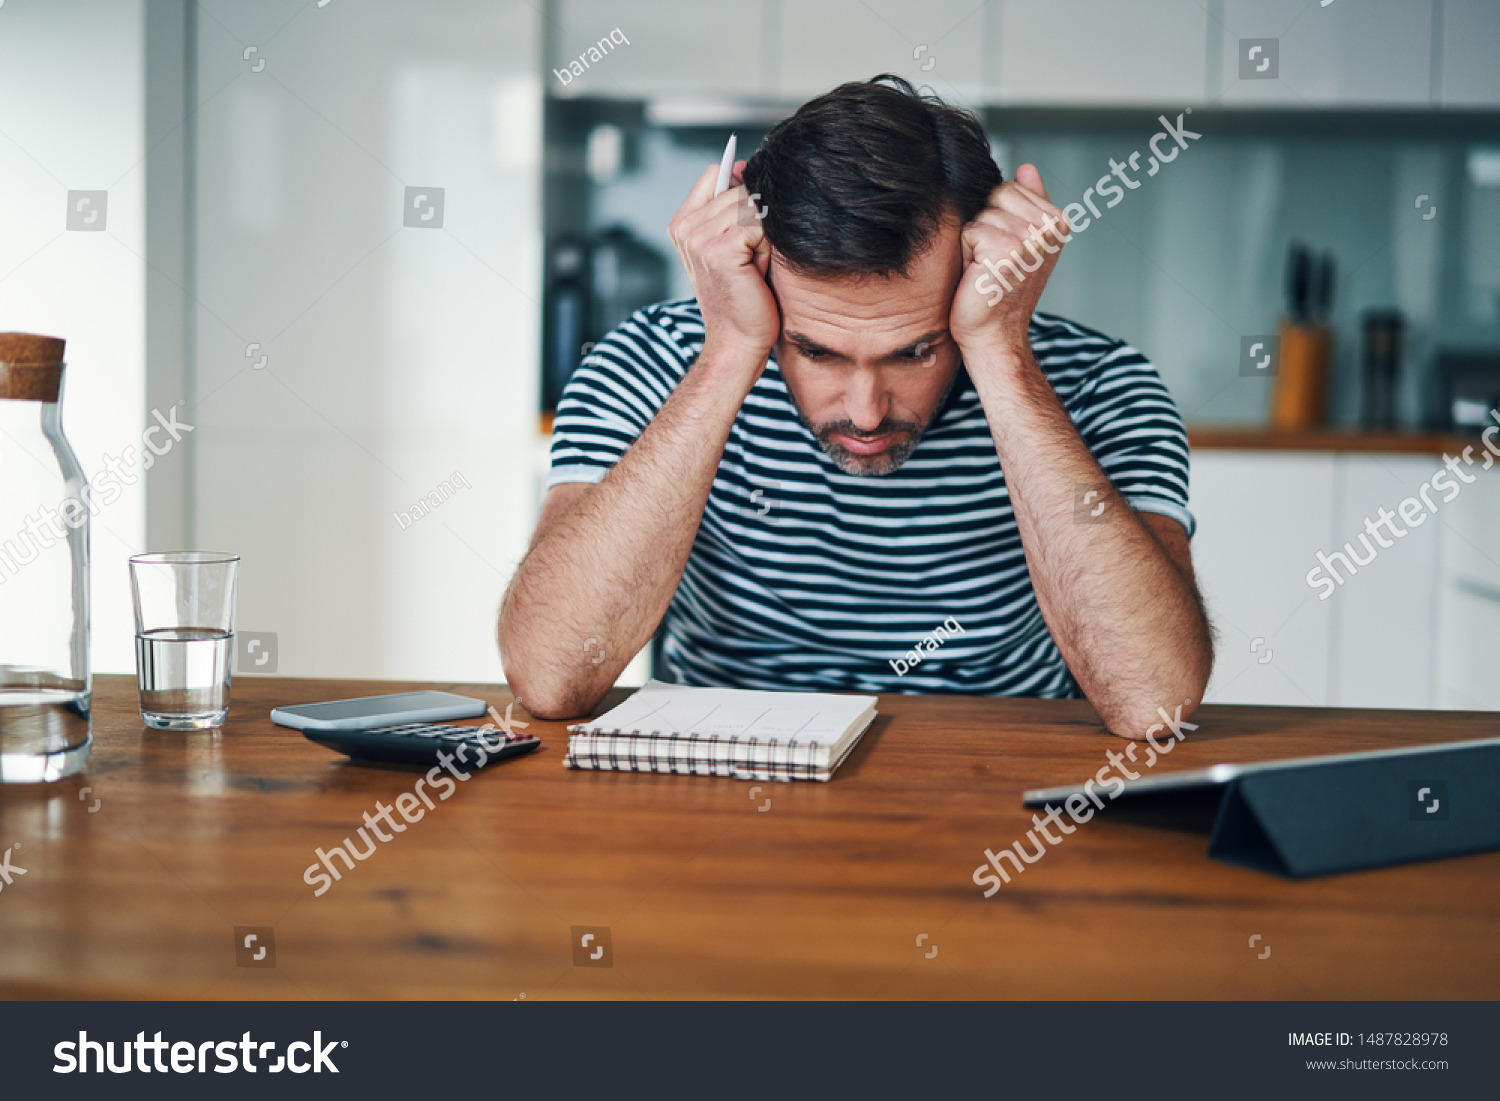 Sad man looking at notebook with home budget and stressing over money #1487828978